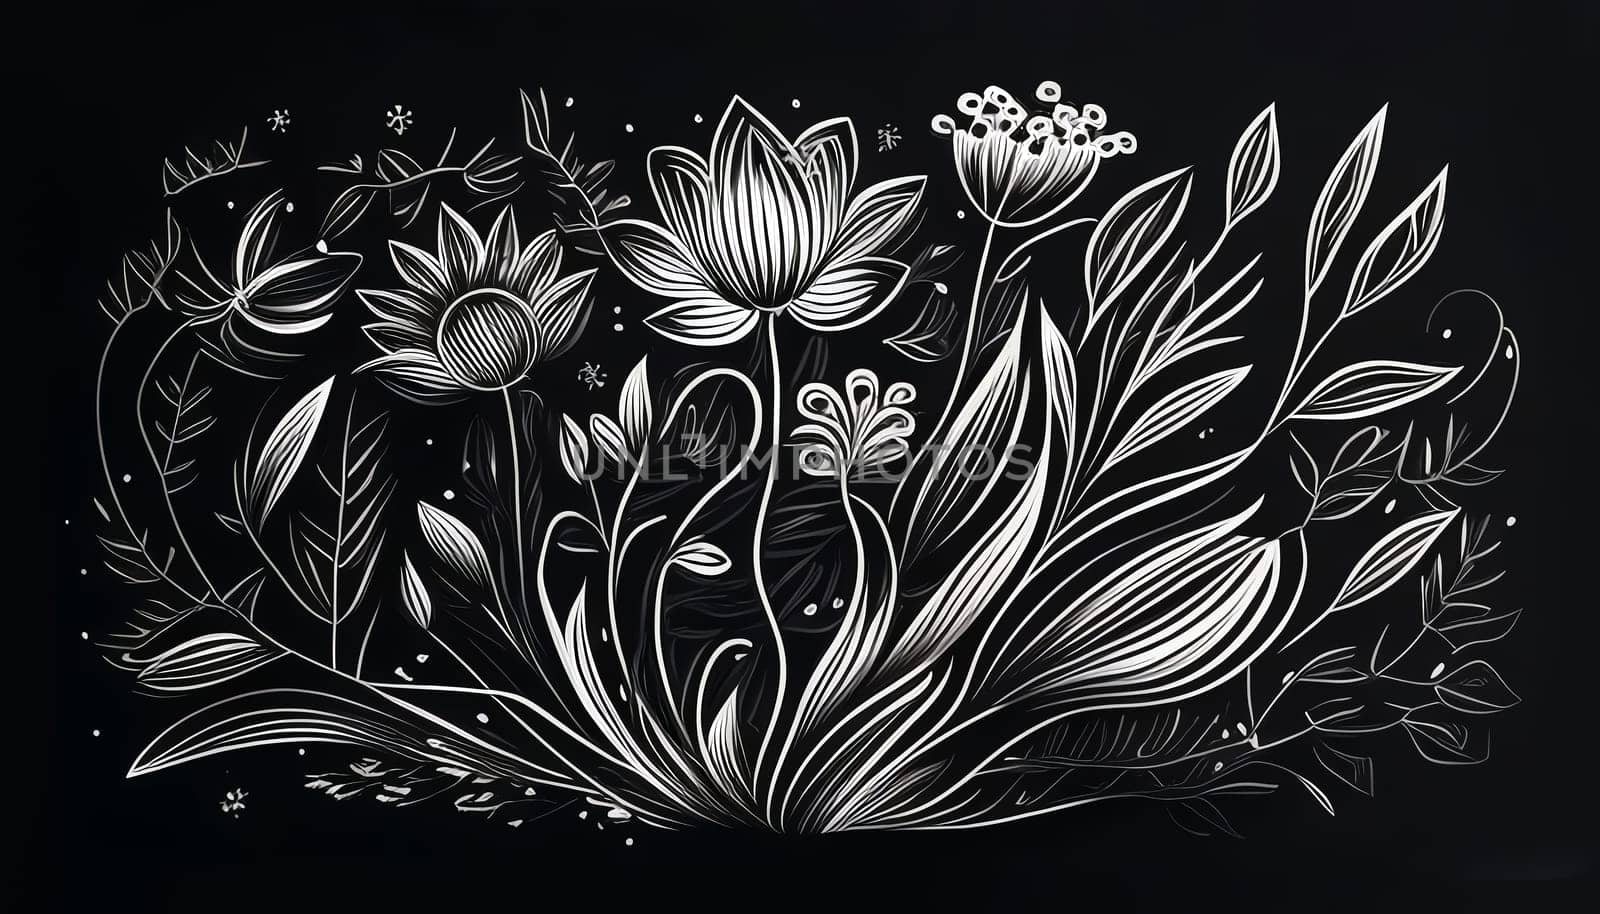 Black and white floral pattern with leaves, flower bouquets. White flowers and black background. Romantic background.